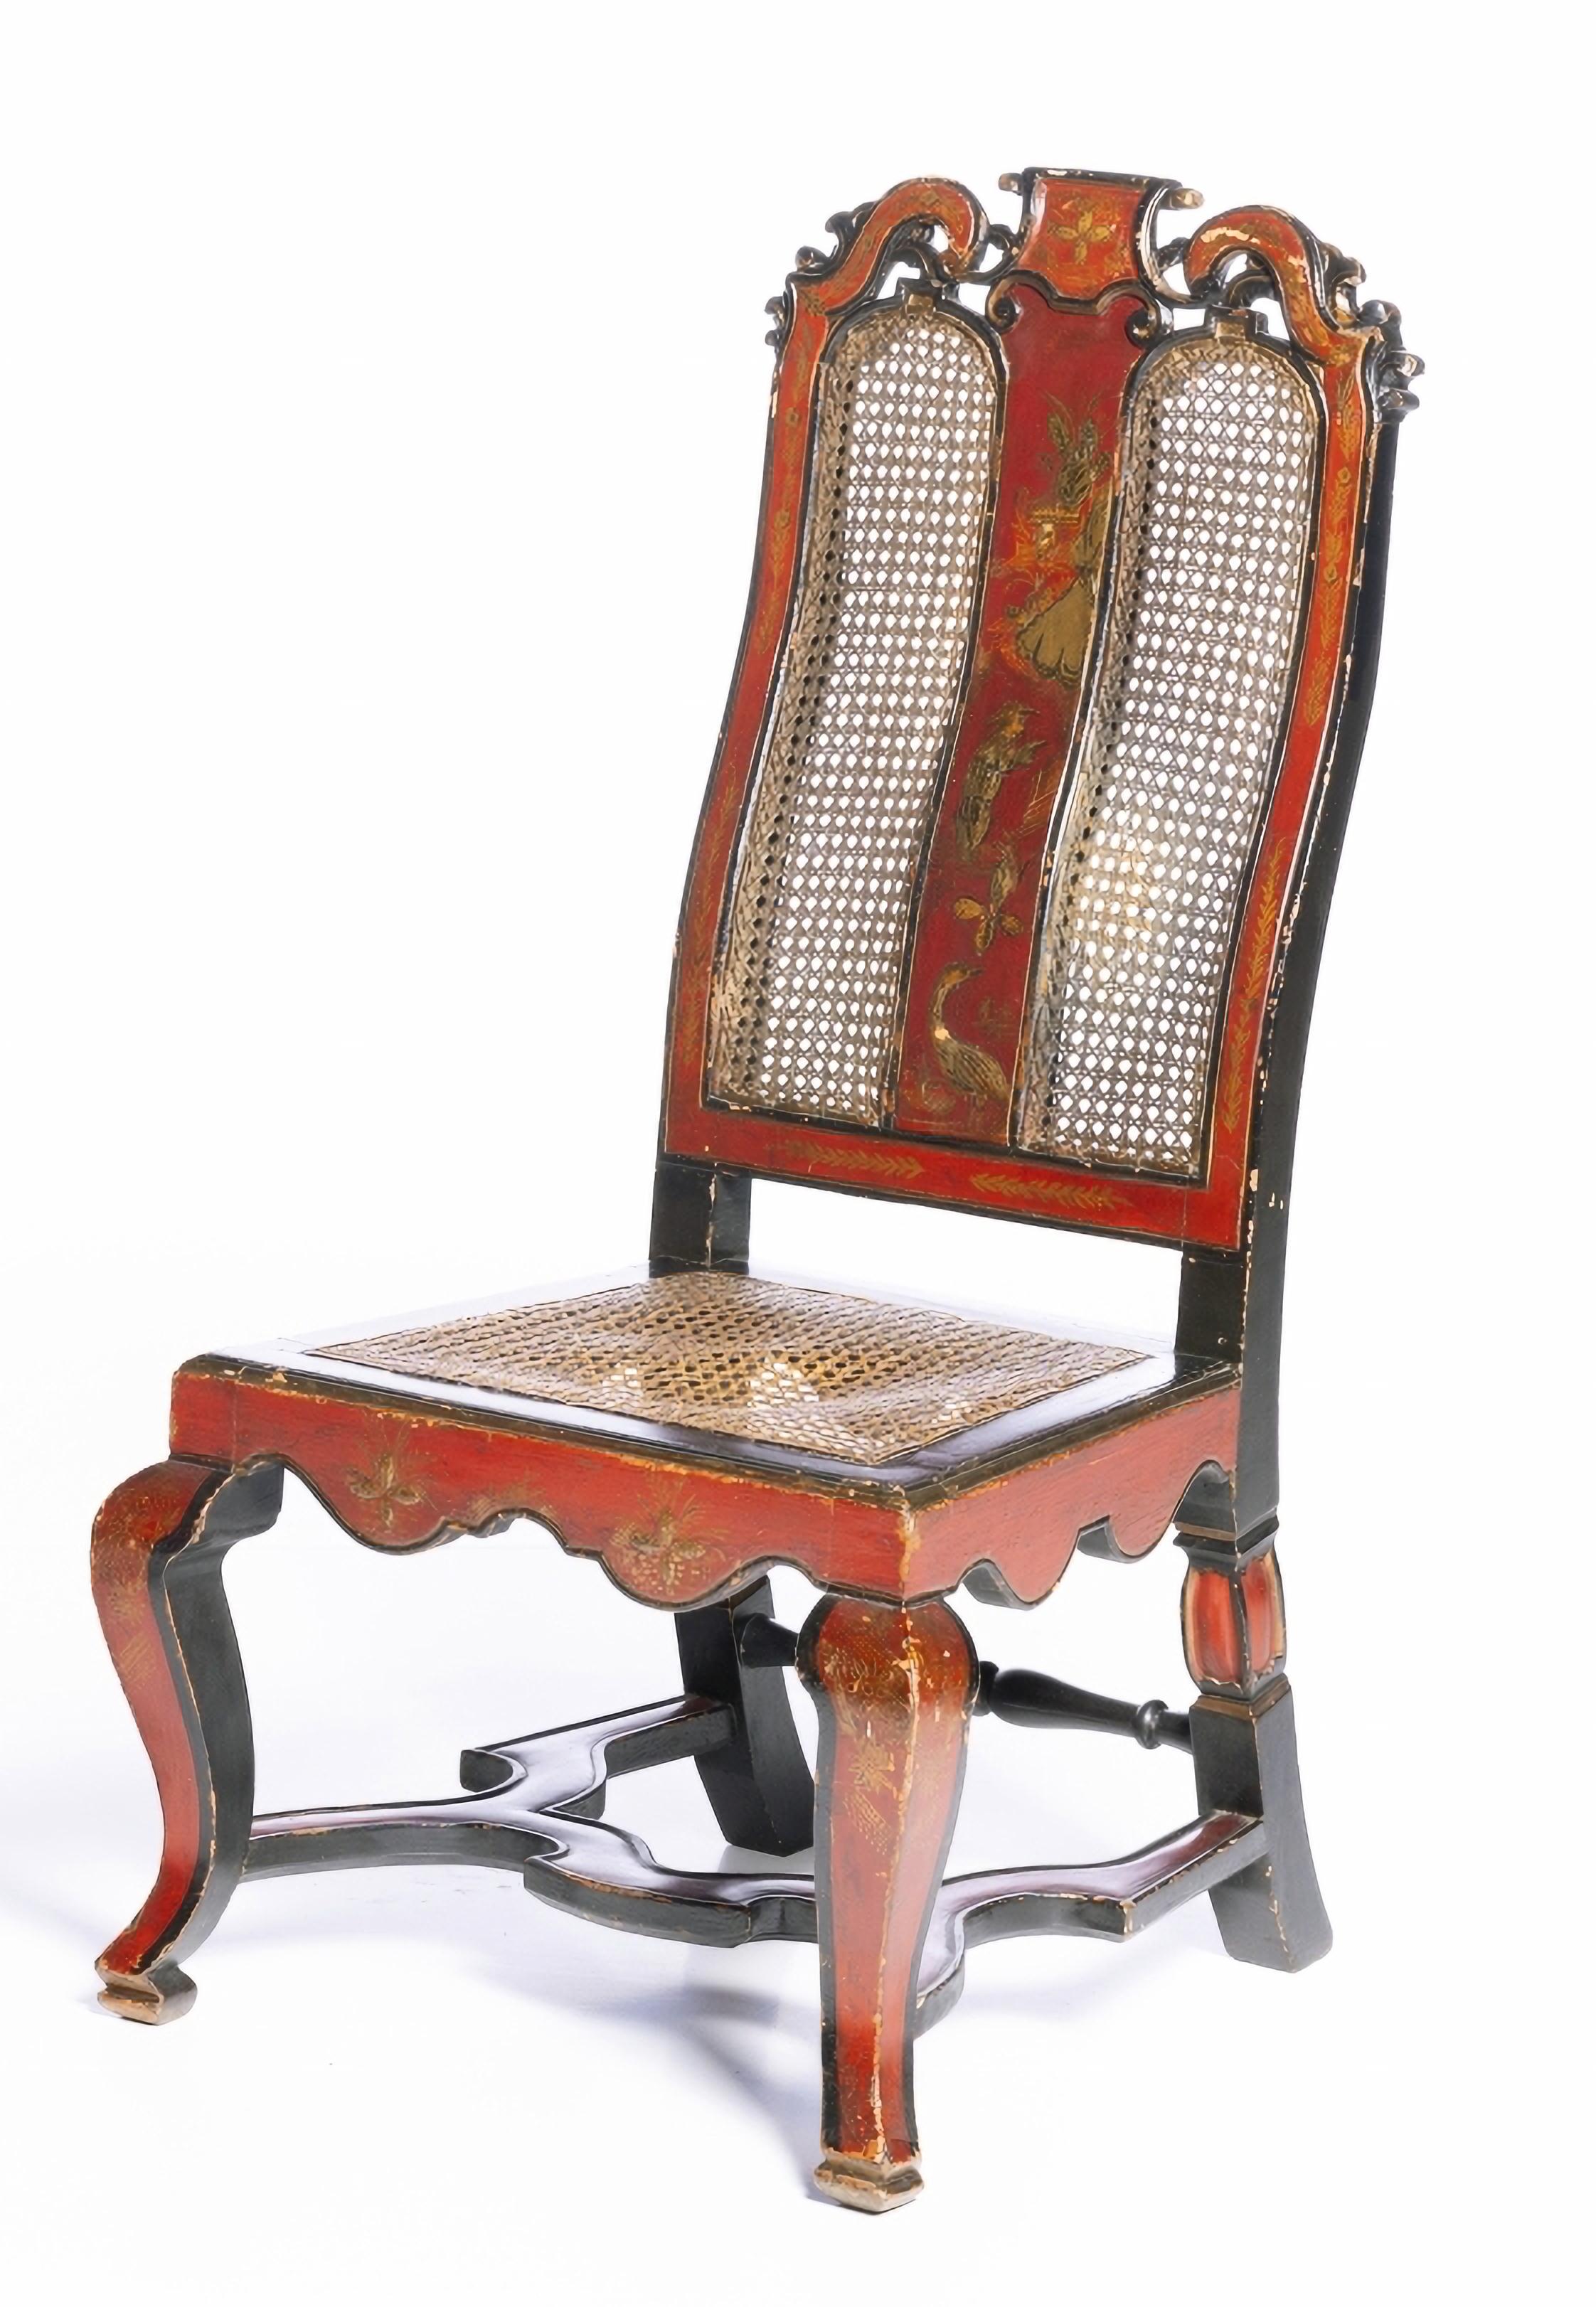 IMPORTANT PAIR OF JORGE II CHAIRS

From the 18th century
in Japanese lacquer, decorated with chinoiserie, figure and bird.
Straw back and seat.
Defects of the age
Dim.: 90 x 47 x 43 cm
good conditions